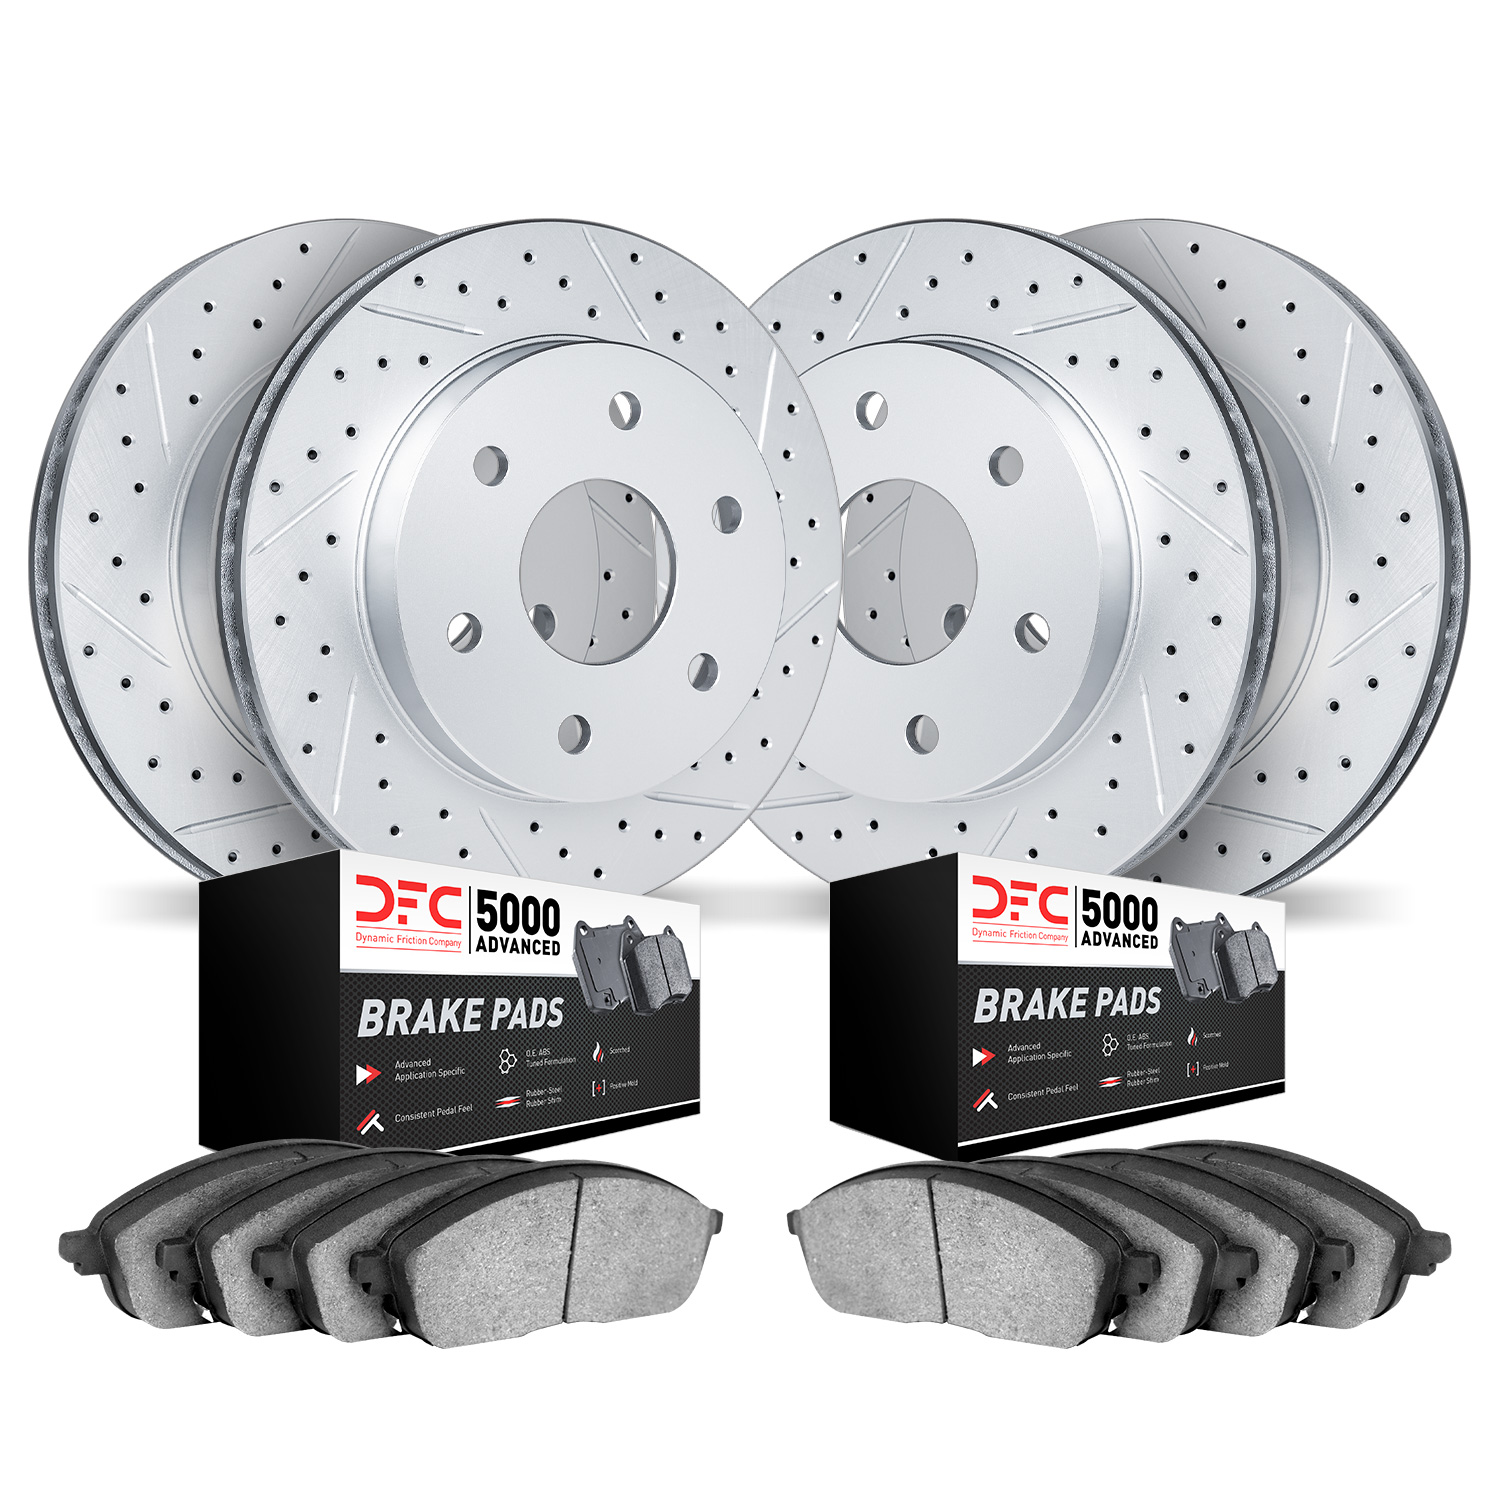 2504-47274 Geoperformance Drilled/Slotted Rotors w/5000 Advanced Brake Pads Kit, Fits Select GM, Position: Front and Rear